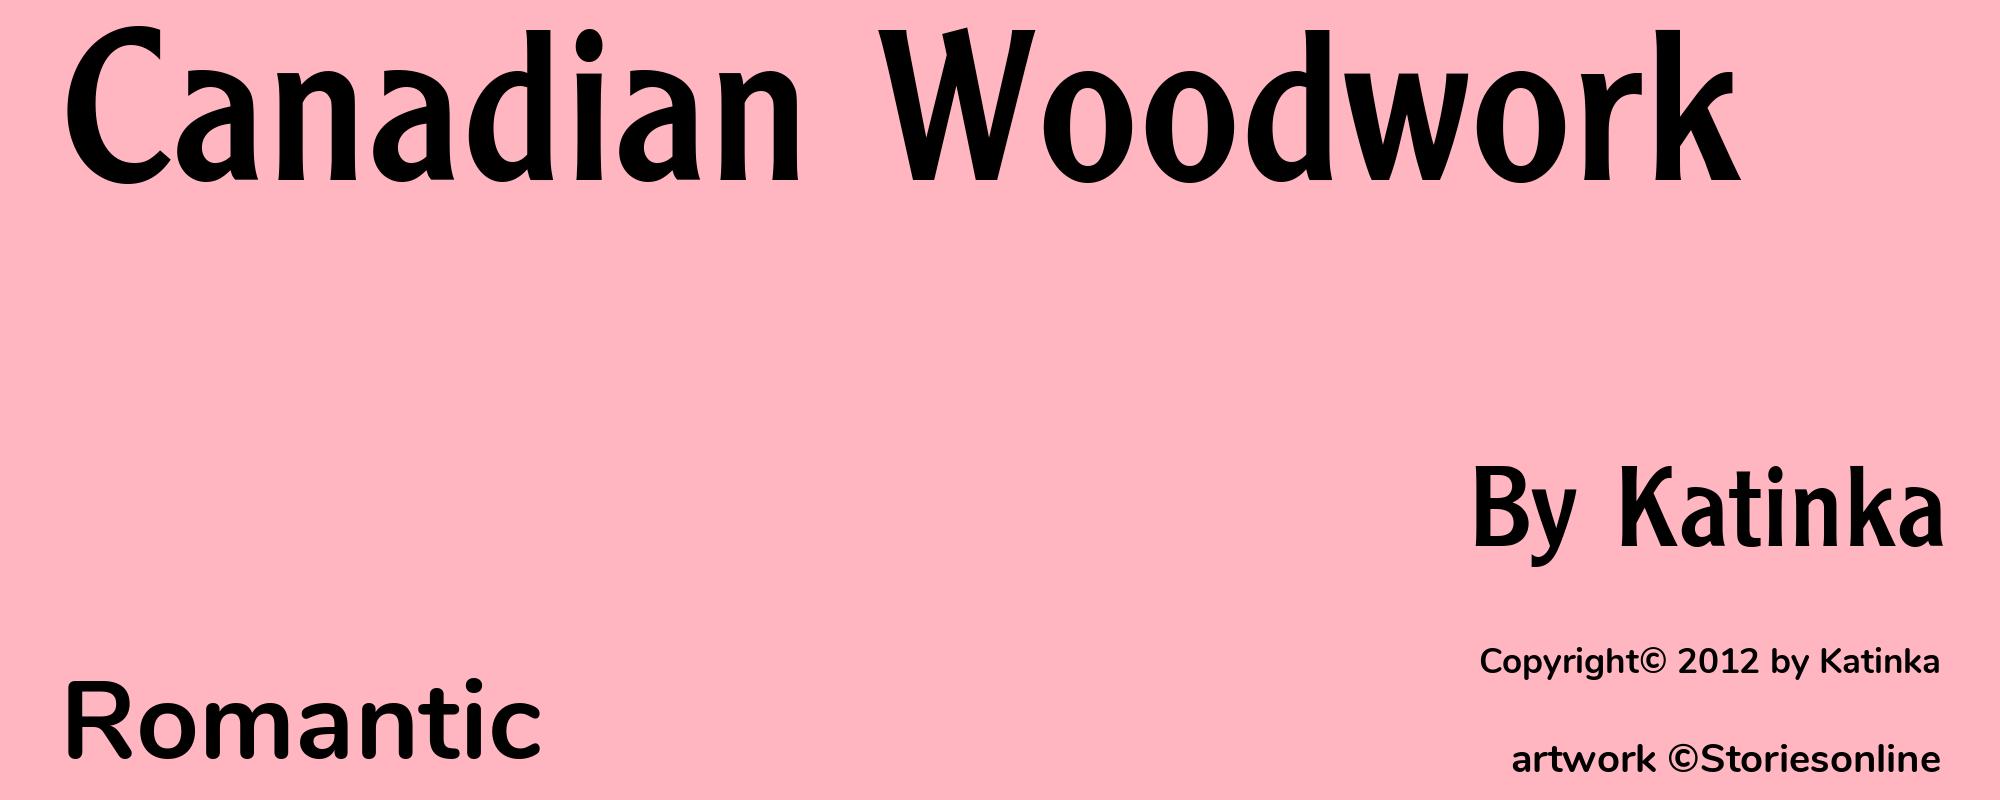 Canadian Woodwork - Cover